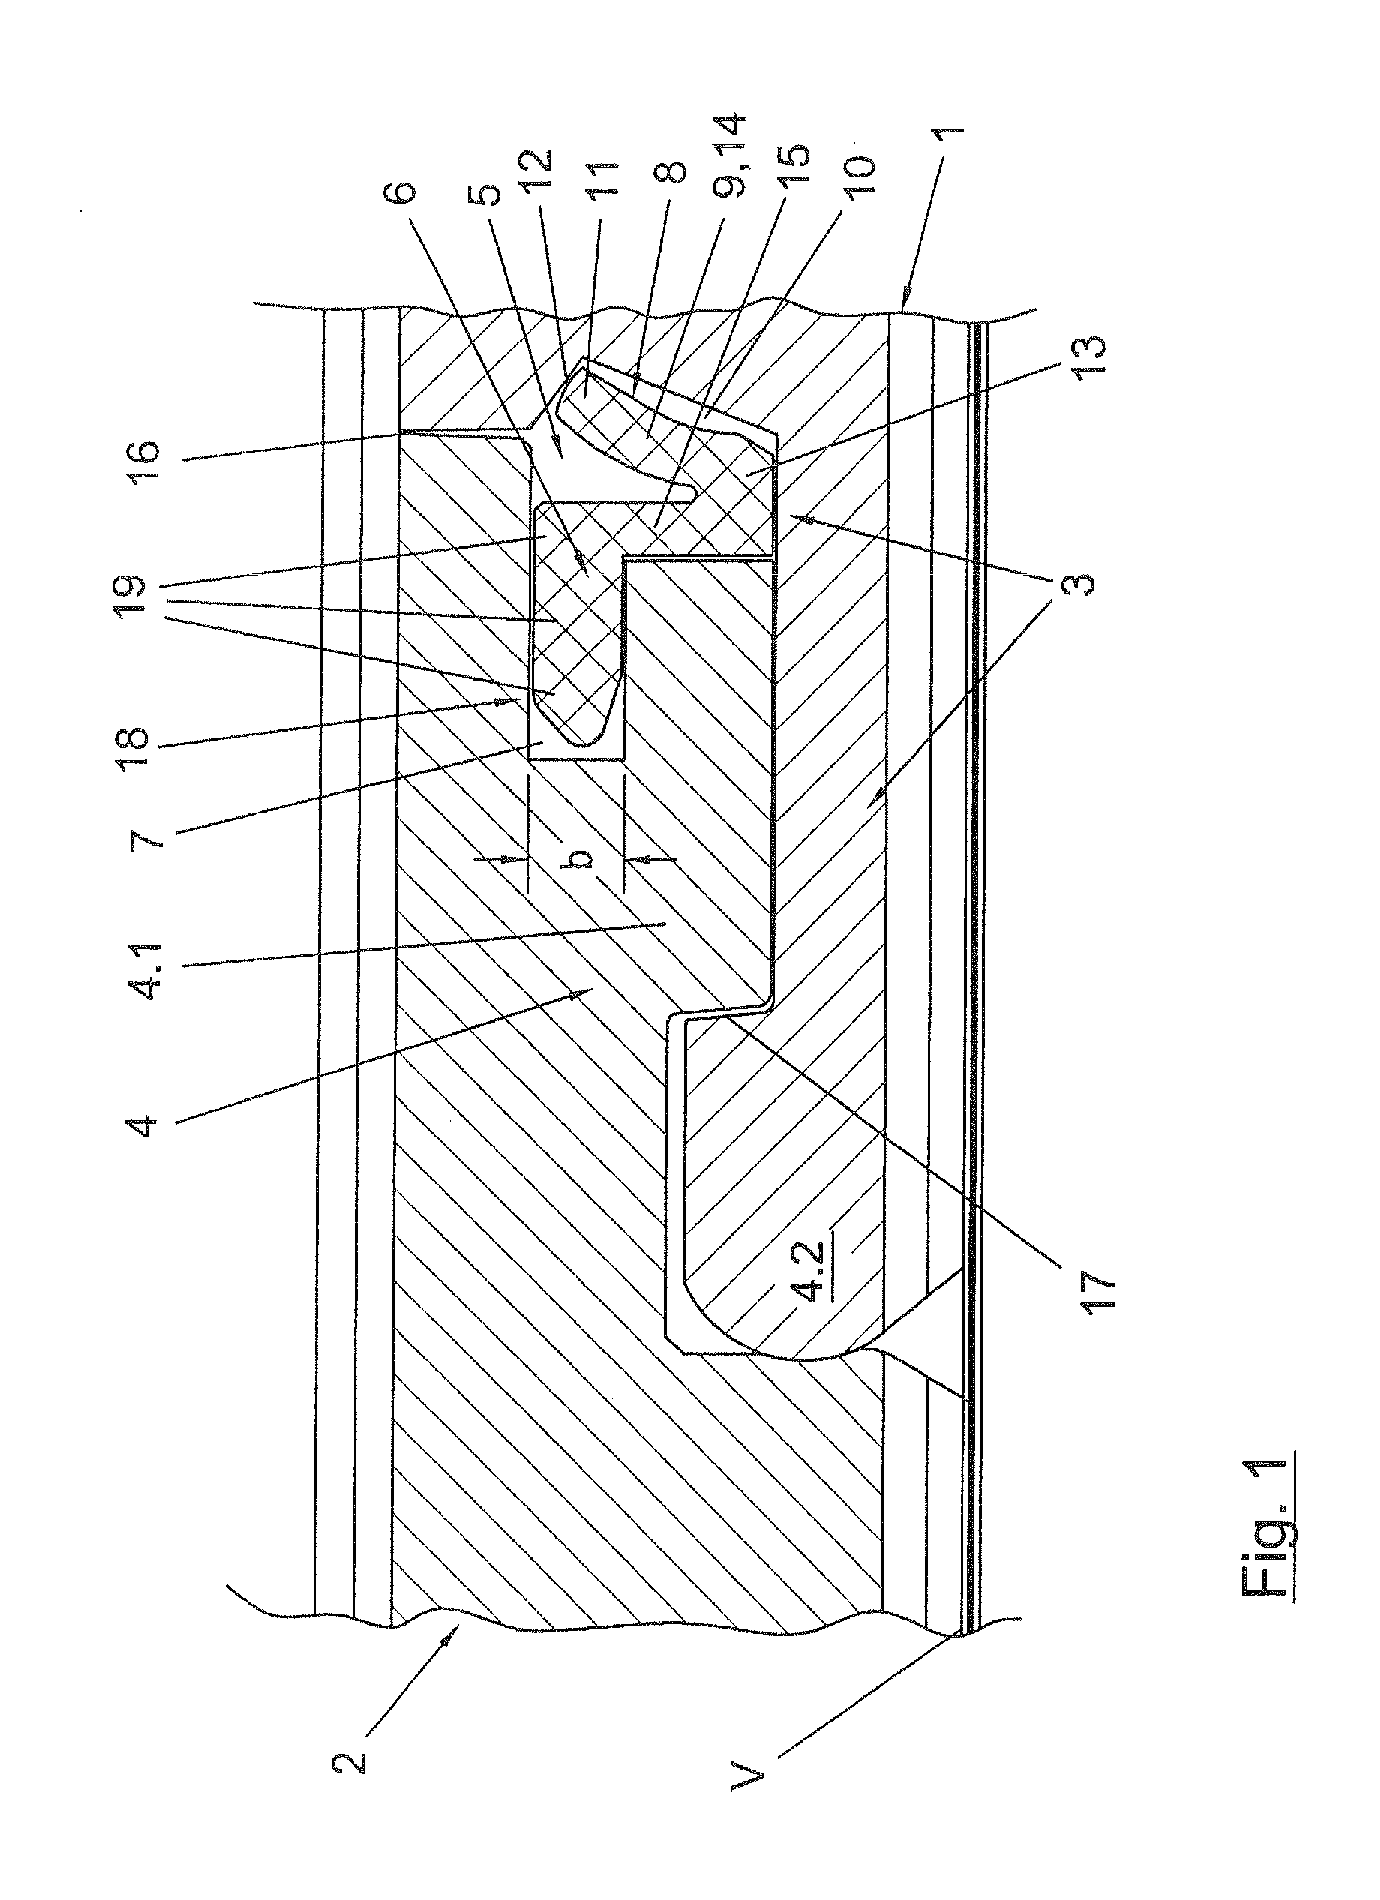 Apparatus for premounting of locking elements to a panel